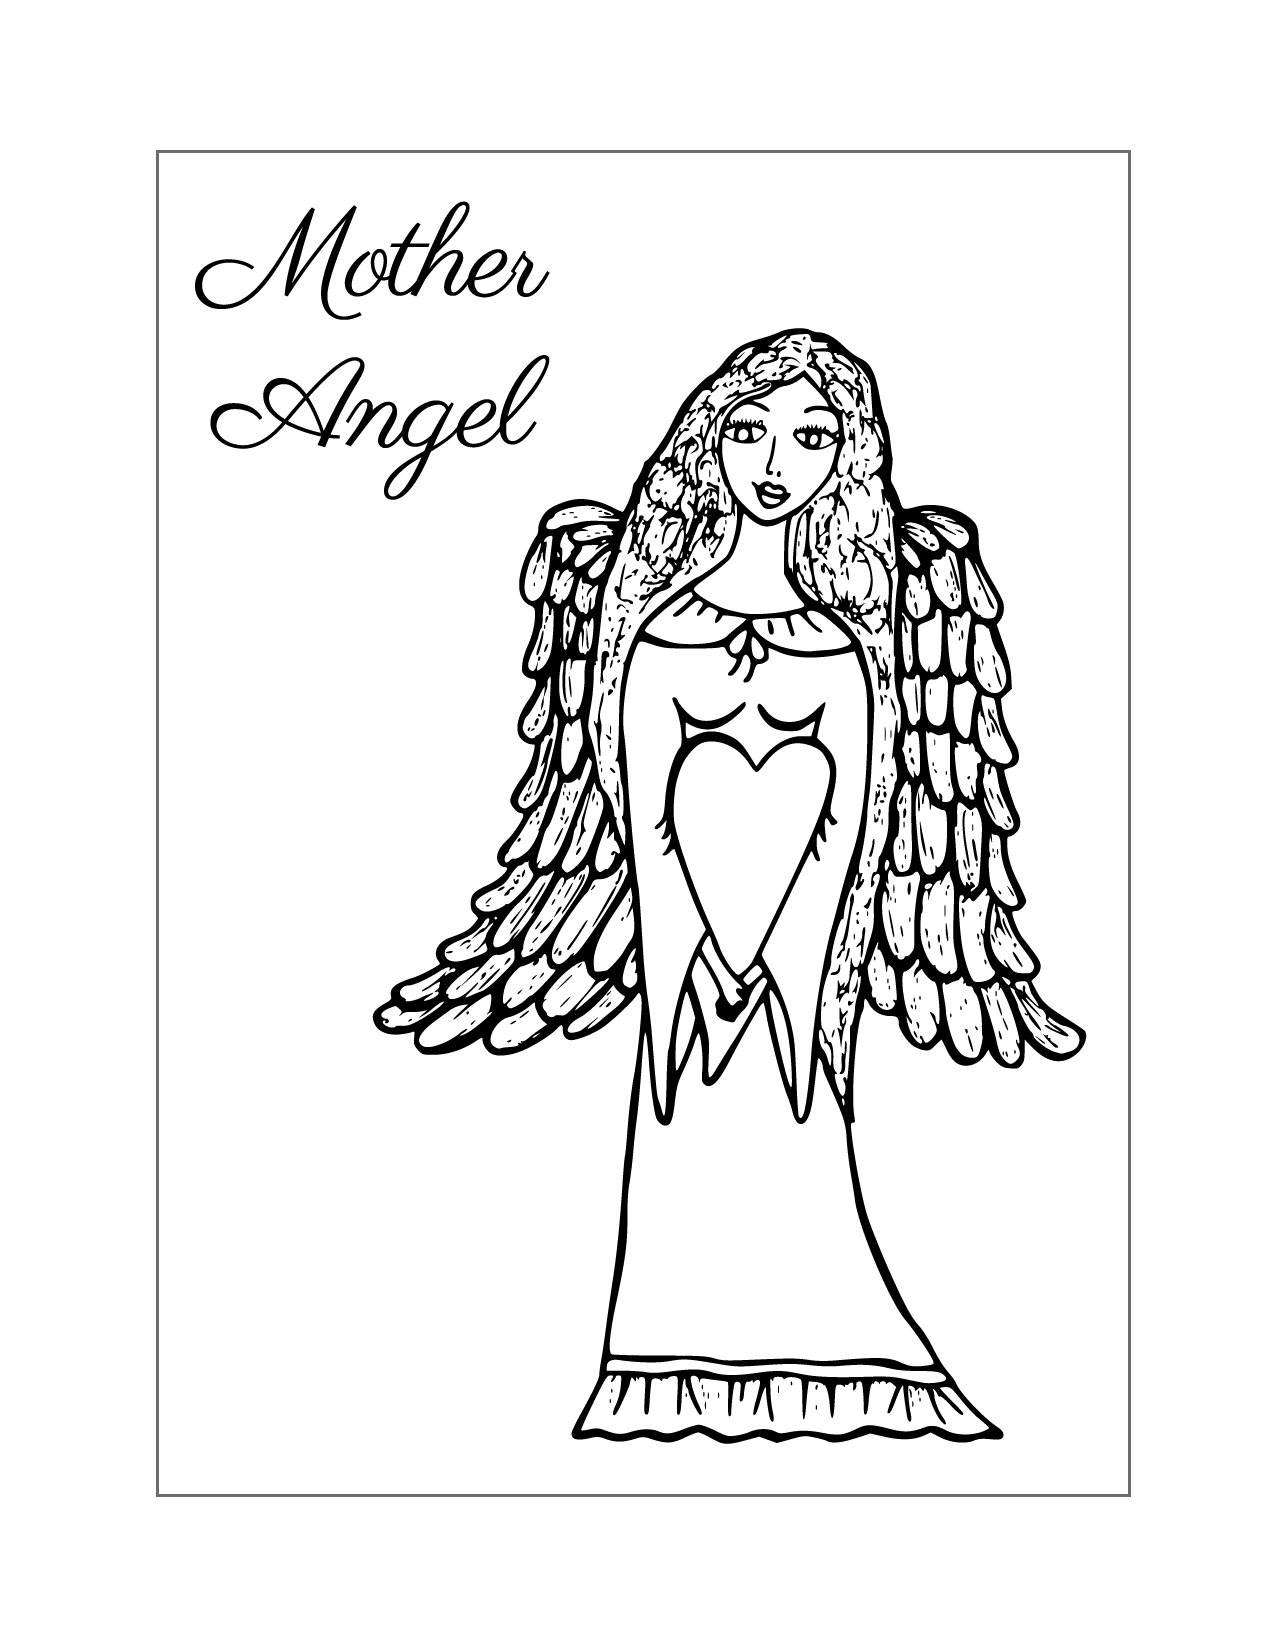 Mother Angel Coloring Page